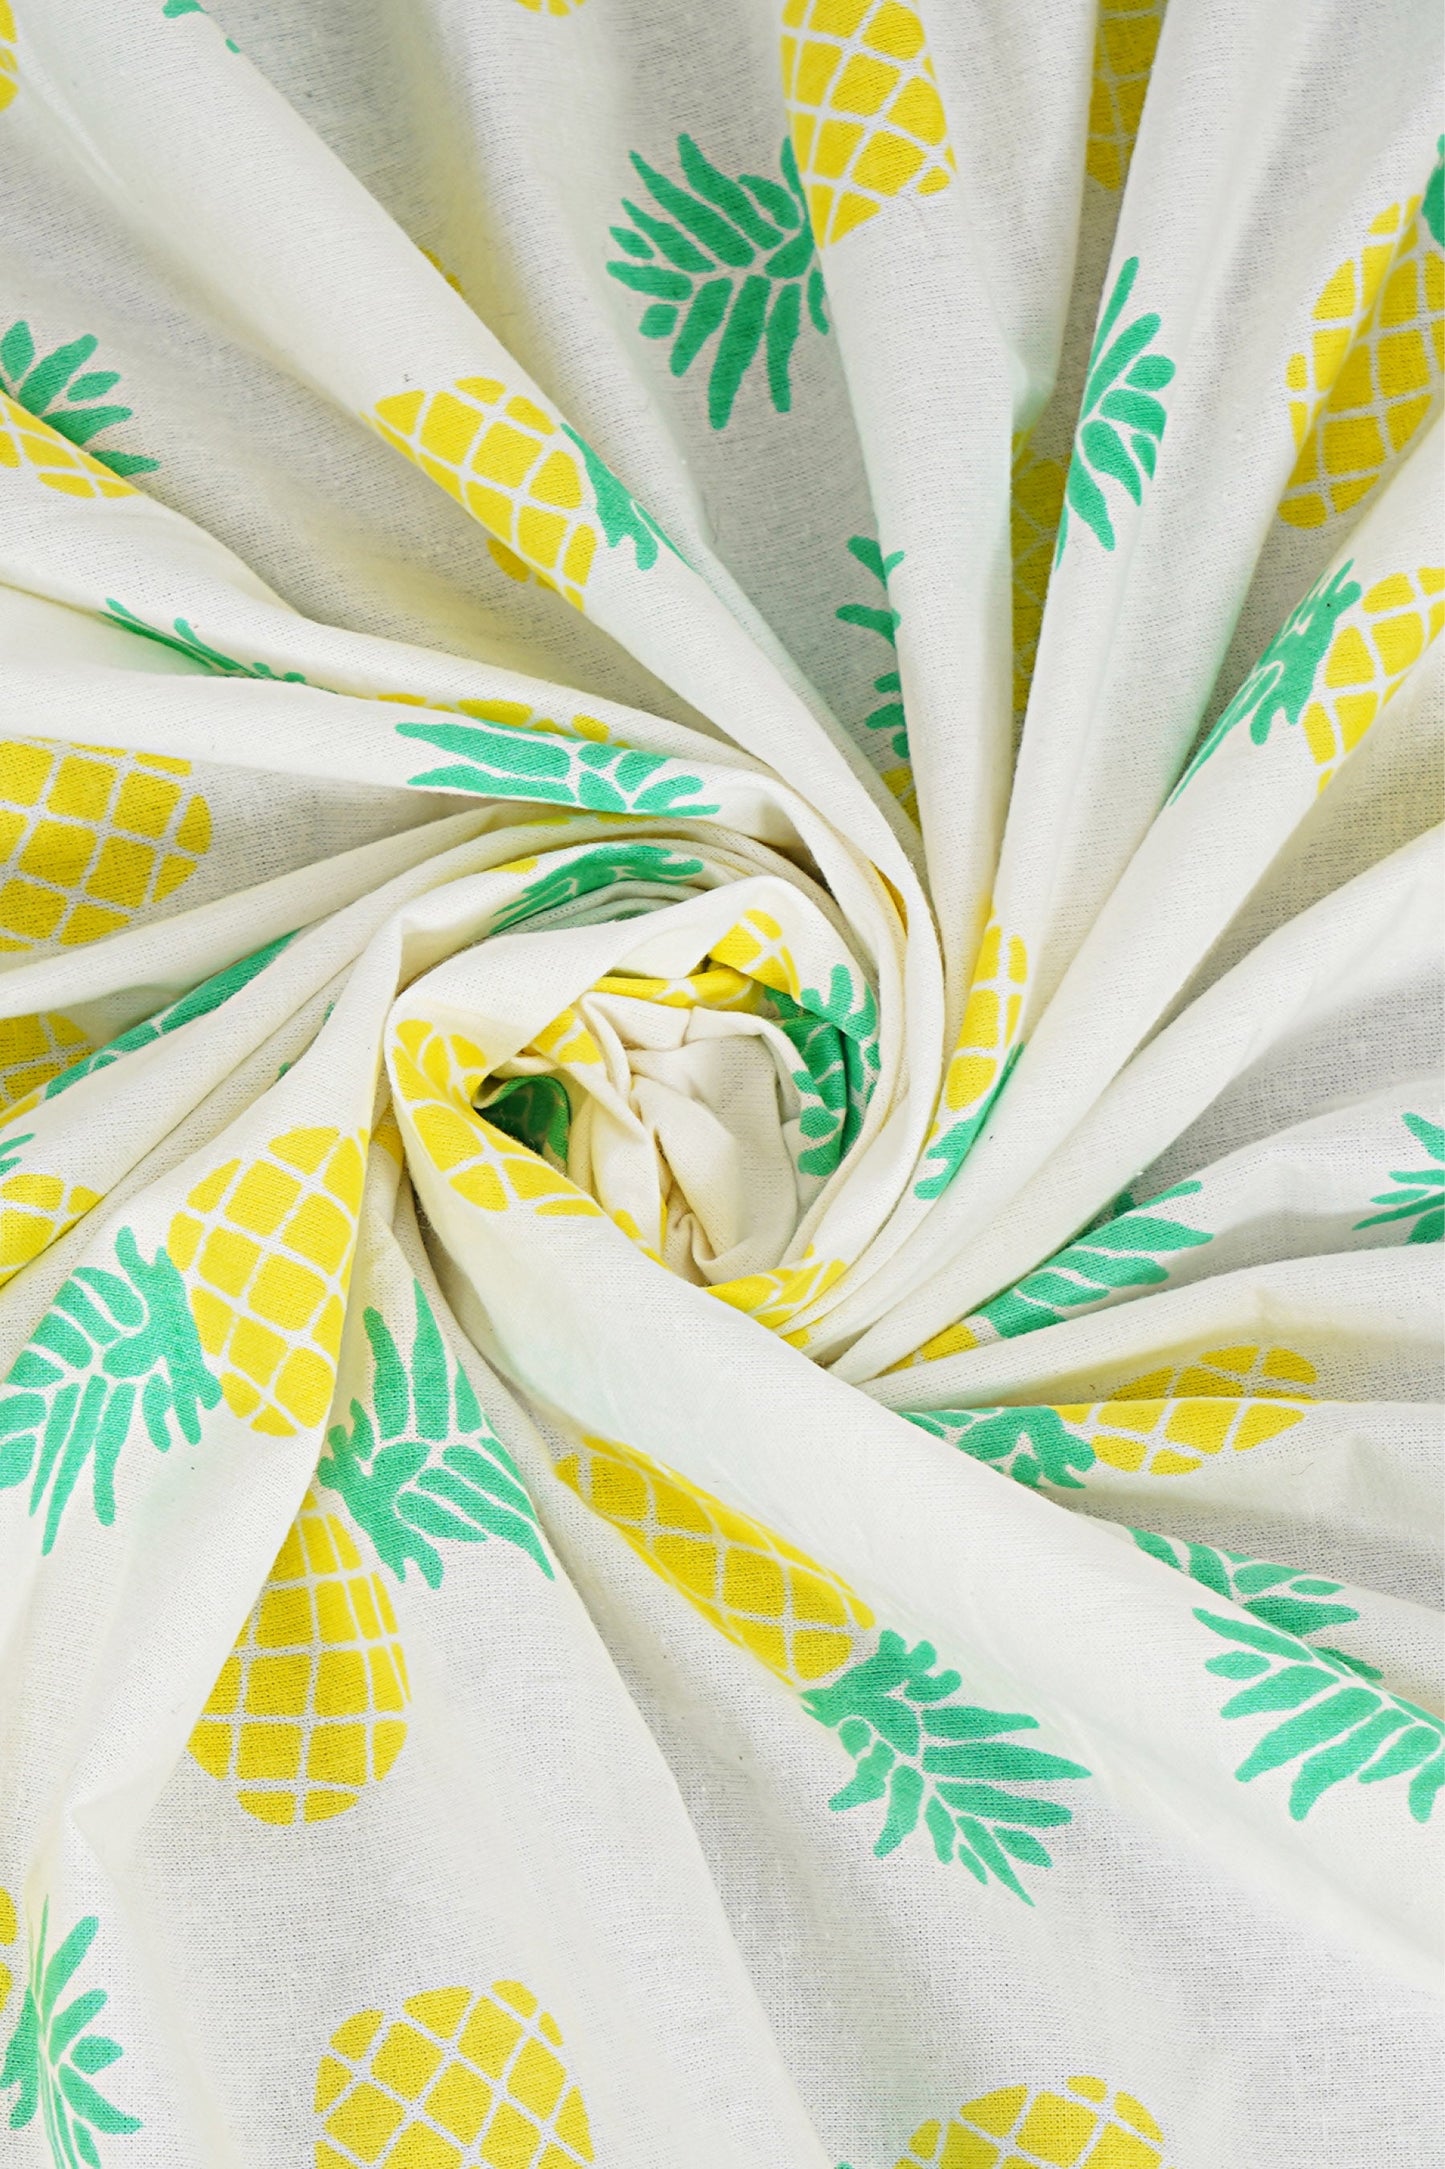 Kids Cotton Bedroom Linens - Double Sheet with 2 Pillow Covers in Pineapple Print - King Size Bed